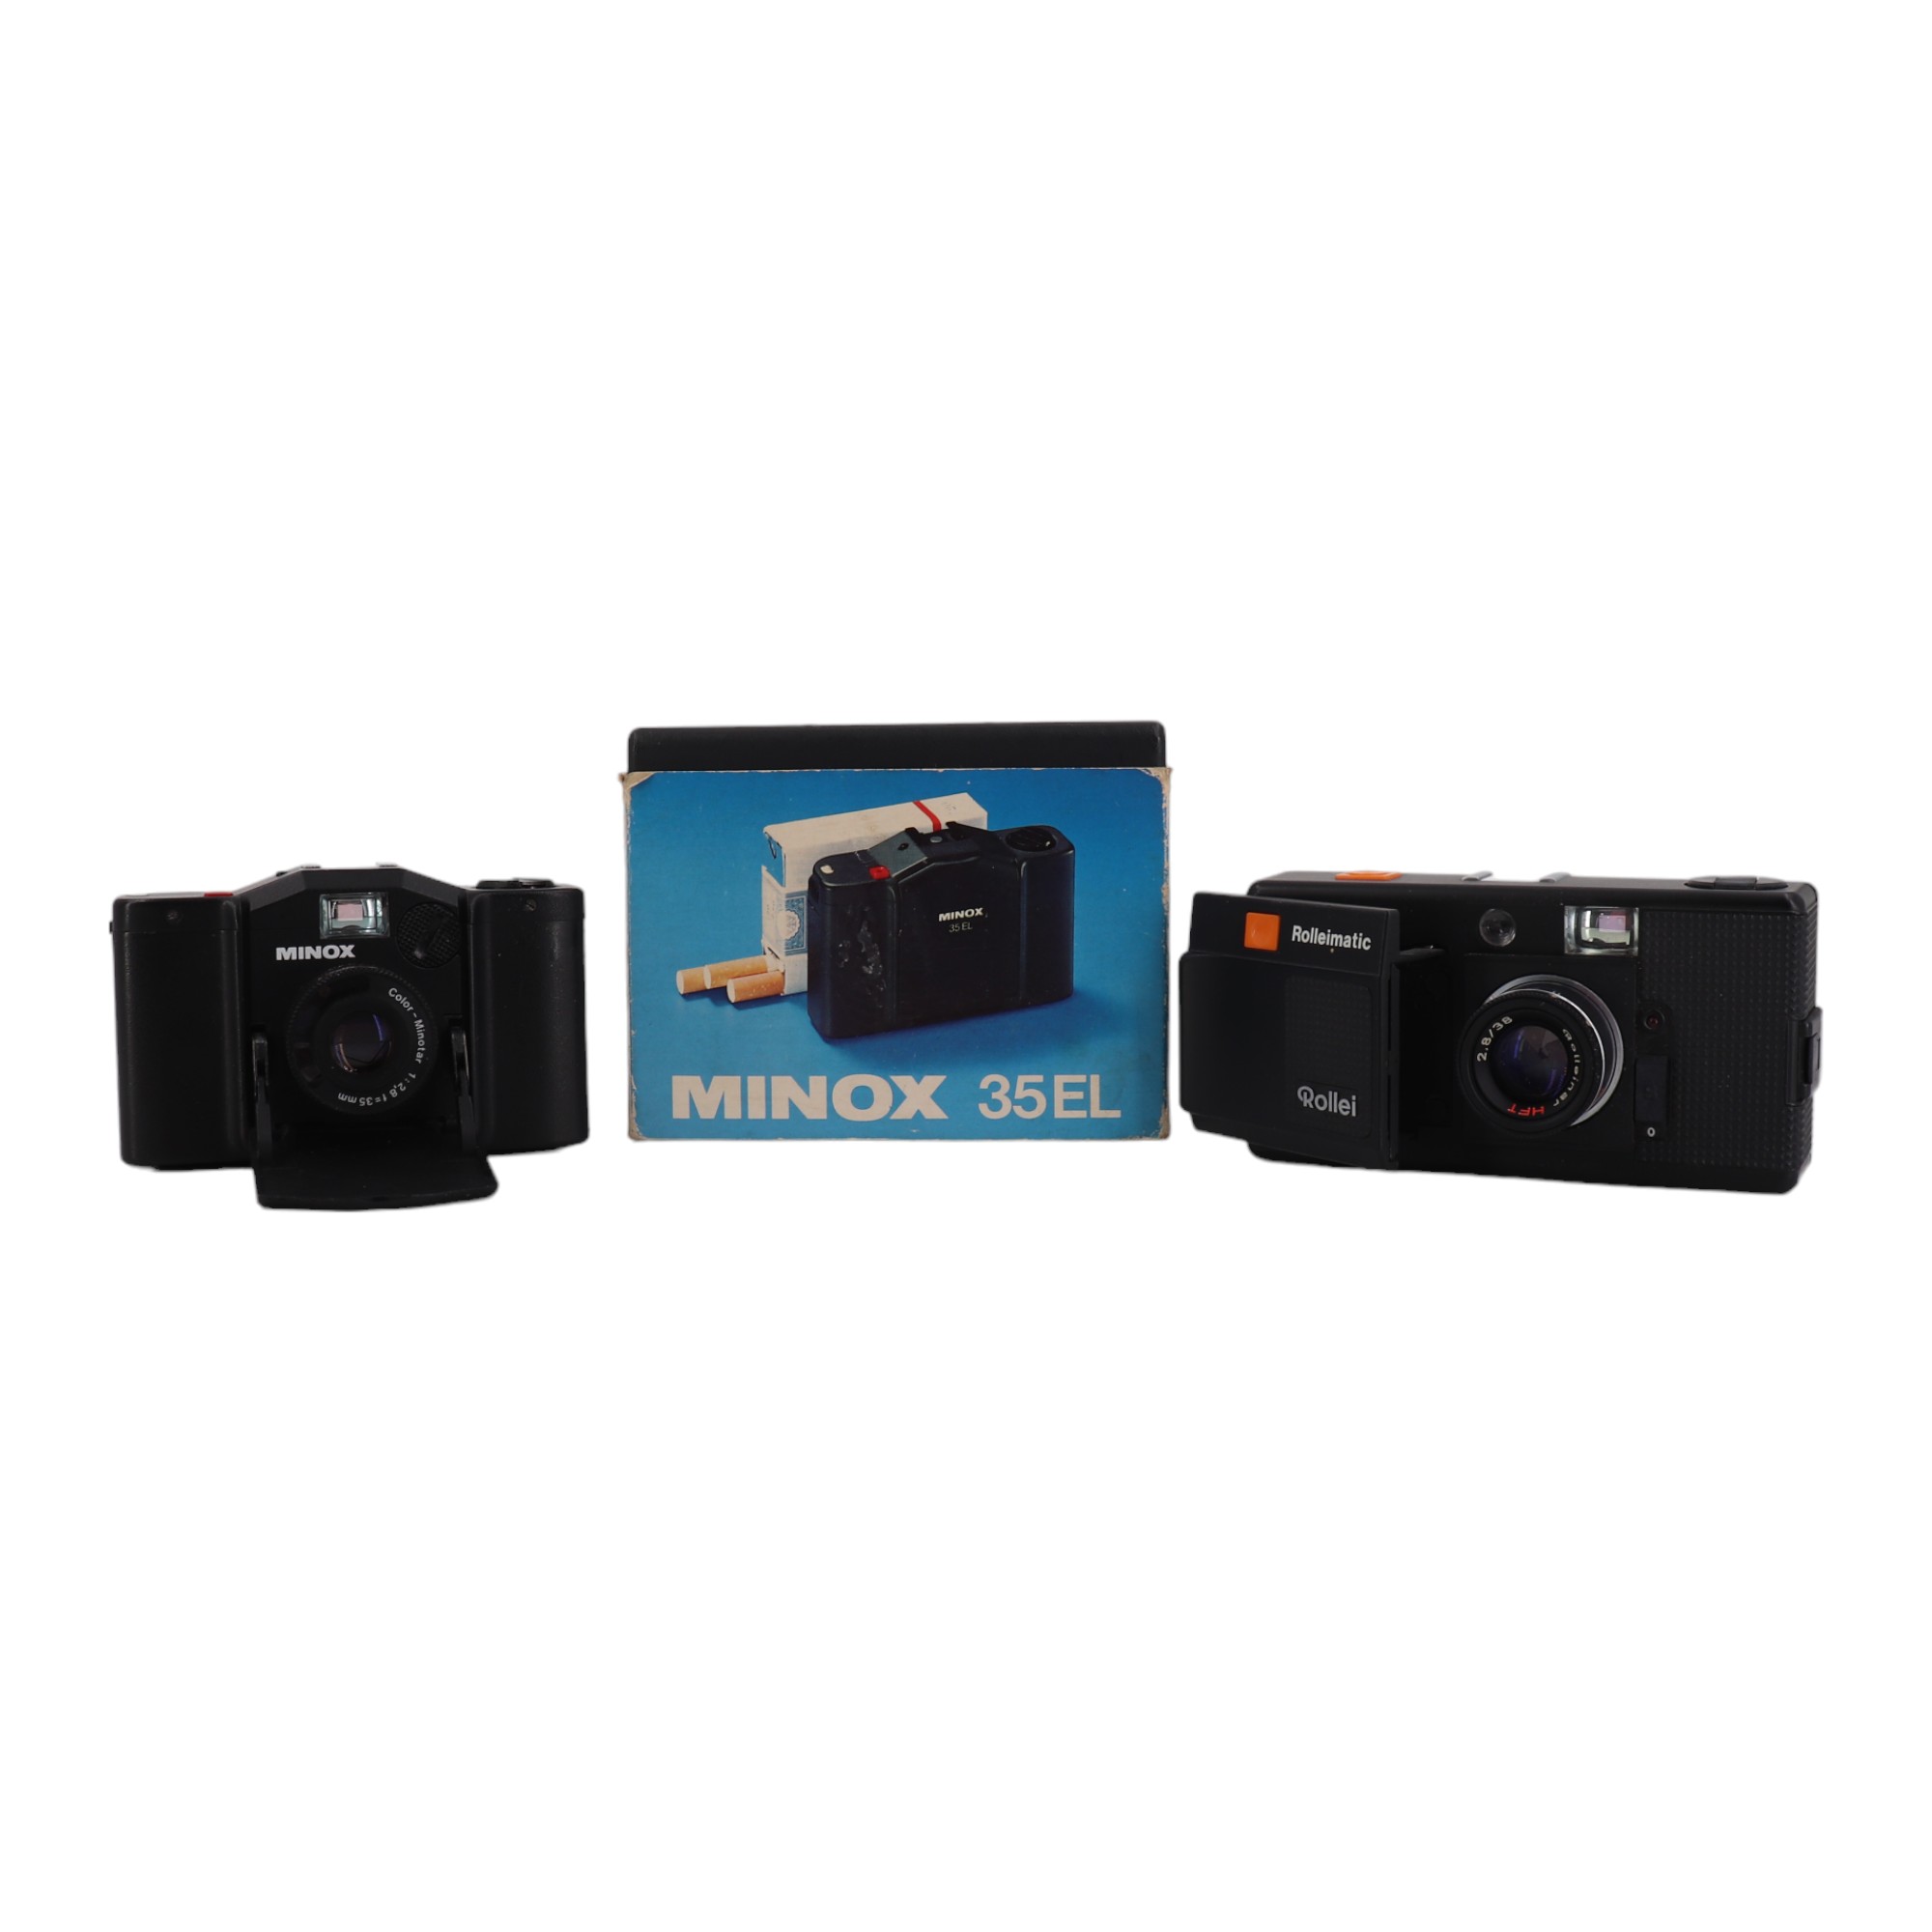 Two 1970s 35 mm compact cameras comprising a boxed Minox 35EL and a Rollei Rolleimatic featuring a